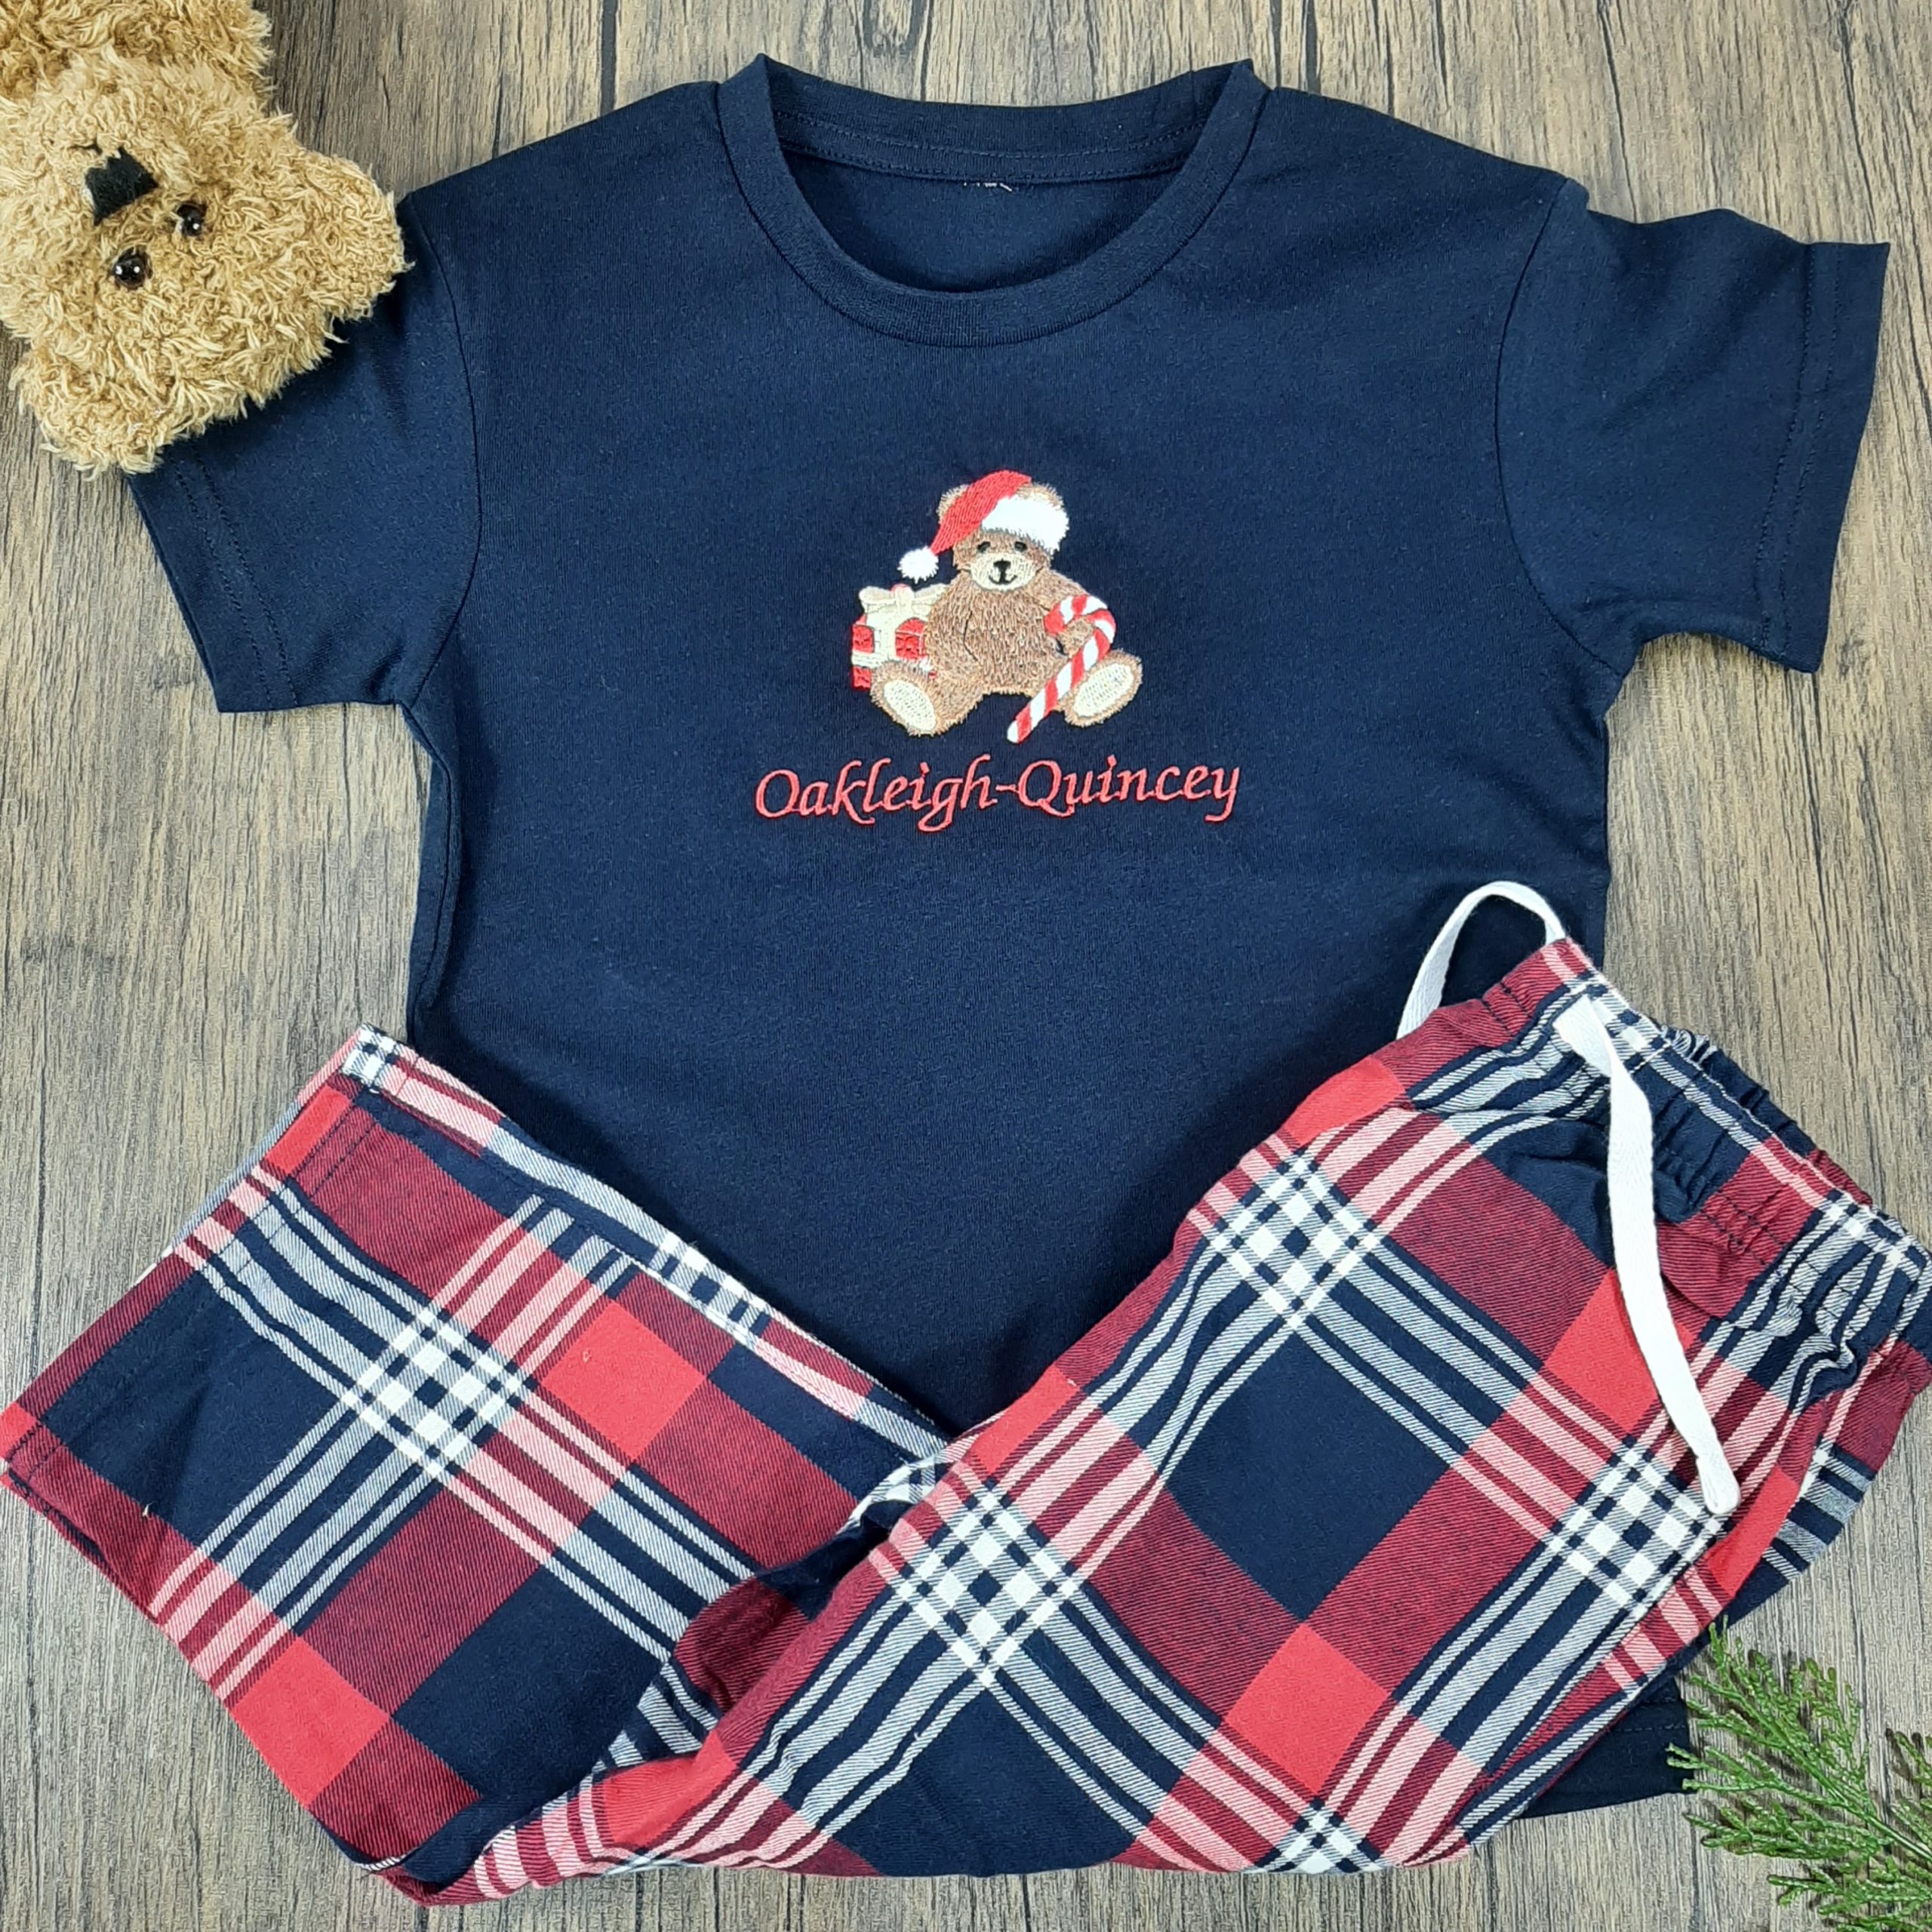 Children's Tartan Teddy PJs are great pyjamas for christmas. All embroidered personalisation. Red name. Laid with teddy